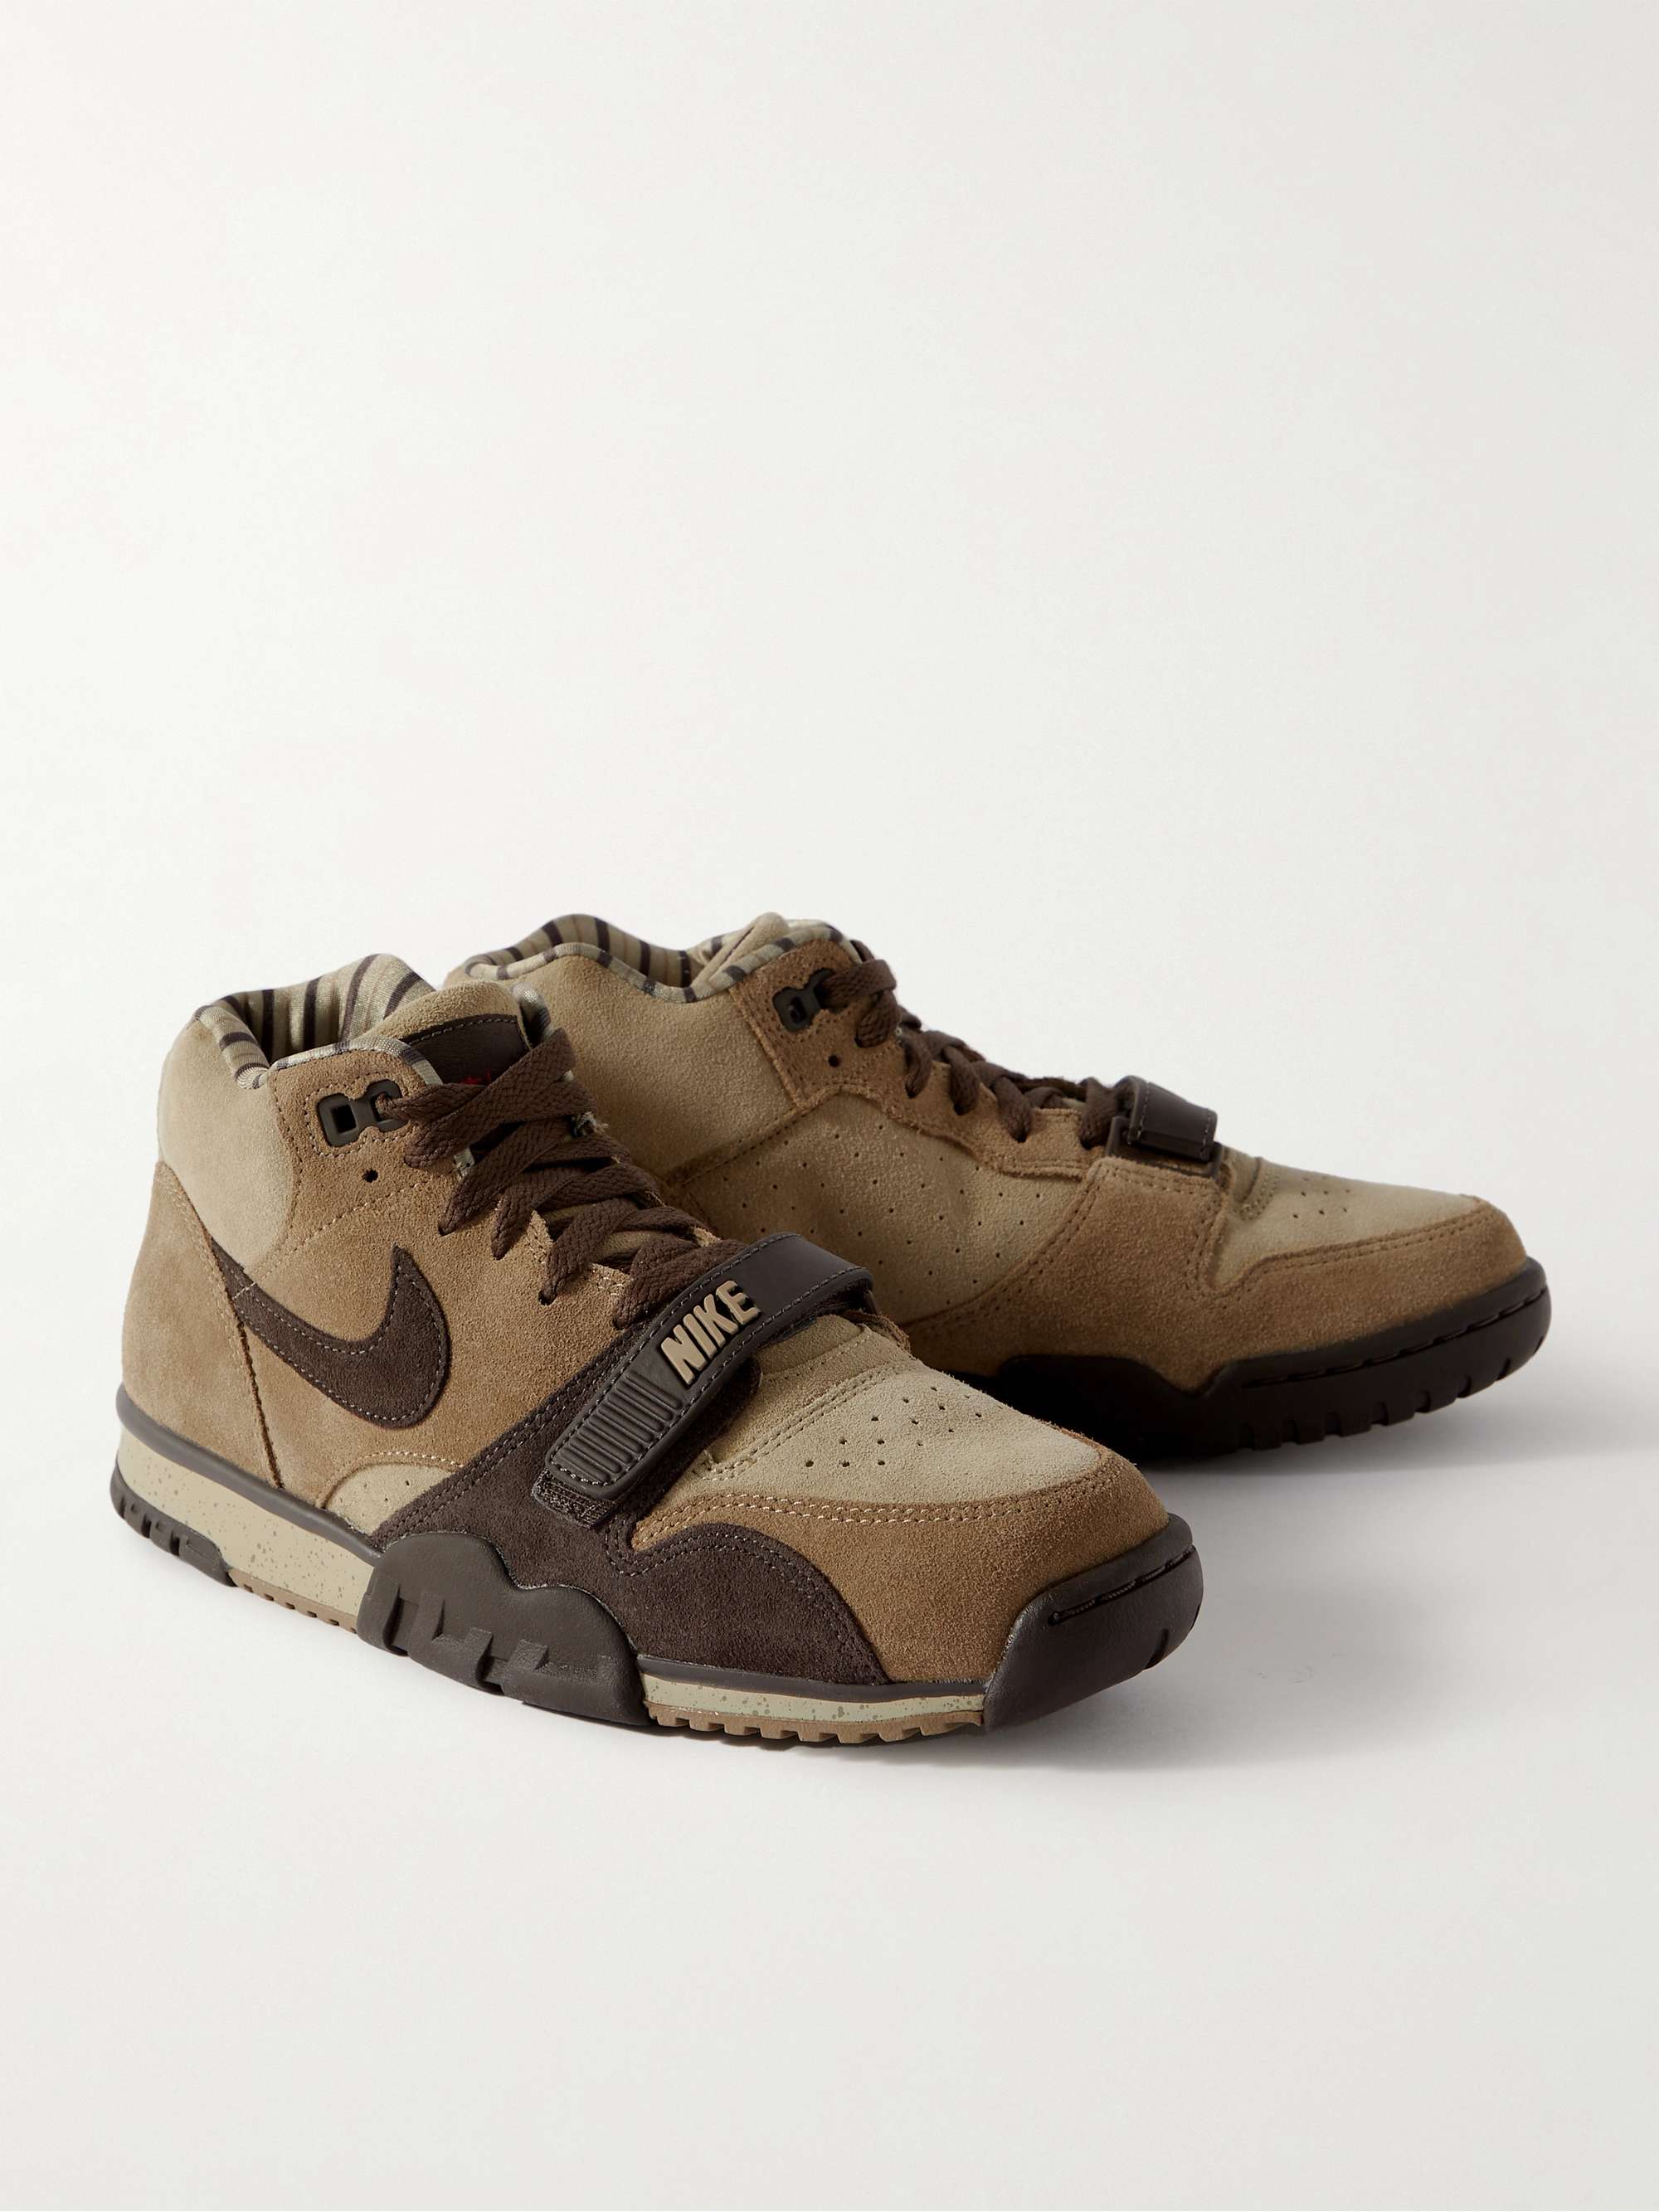 NIKE Air Trainer 1 Leather-Trimmed Suede Sneakers